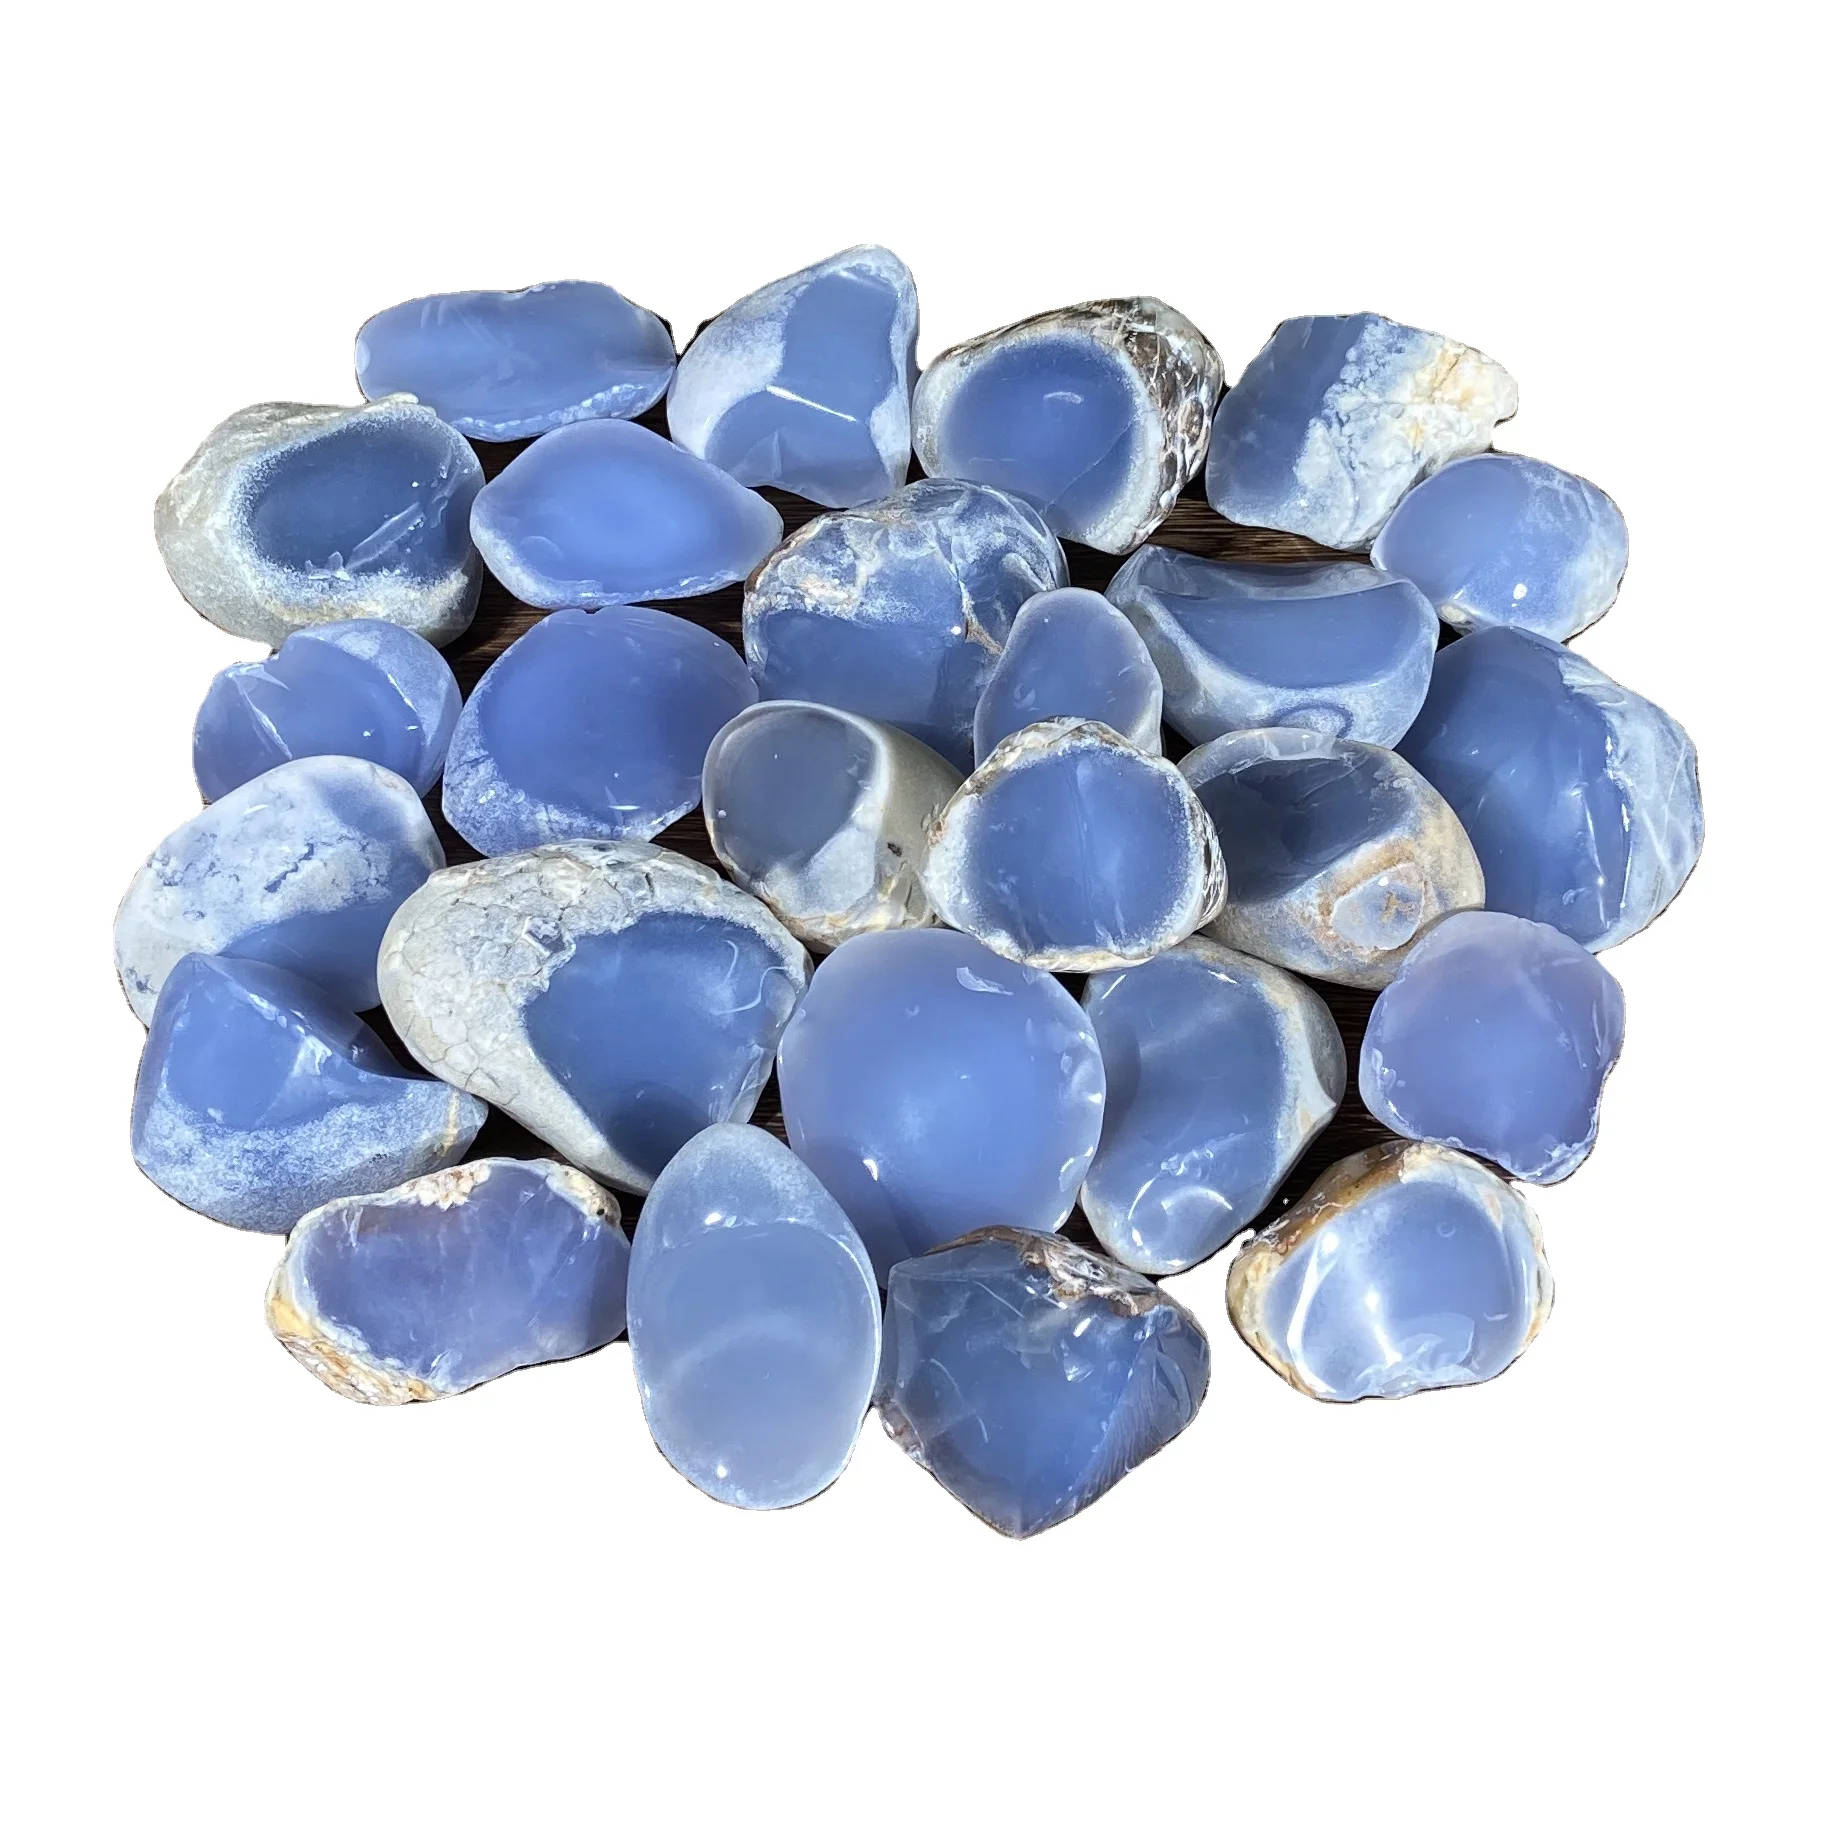 

Wholesale Heave Washed Blue Chalcedony Rough Natural Crystal Gemstone blue agate stone jade jasper healing roughs polished, Natural blue